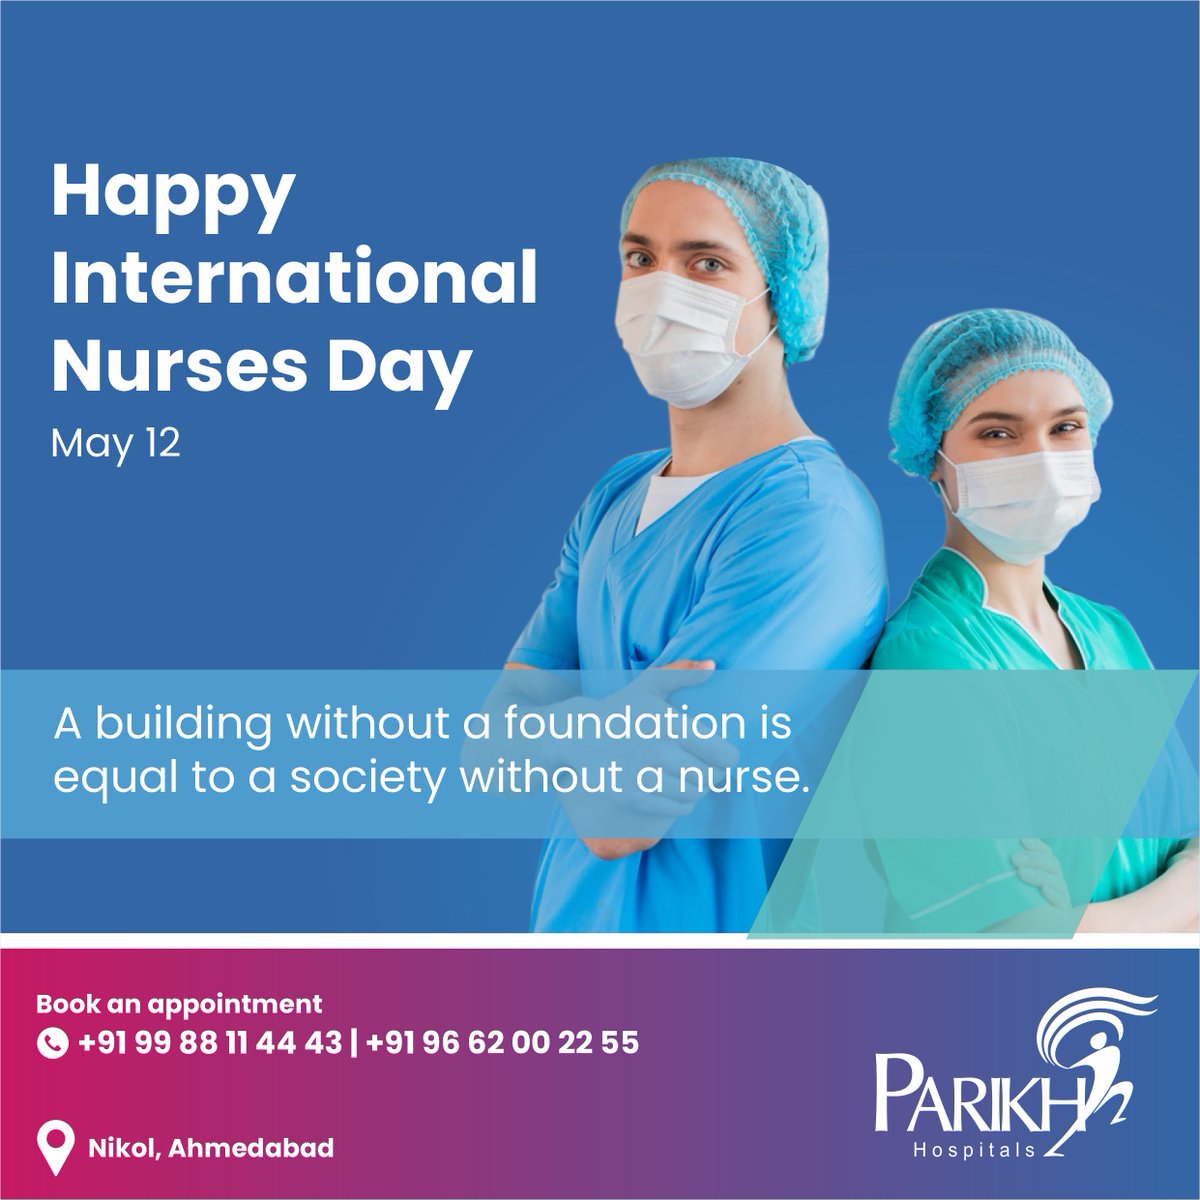 We thank you for all your courage, compassion & commitment Our Nurses, Our Future #InternationalNursesDay #Nurses #nurseday #internationalnursesday2023 #nursesheros #care #commitment #future #nursecare #ThankYou